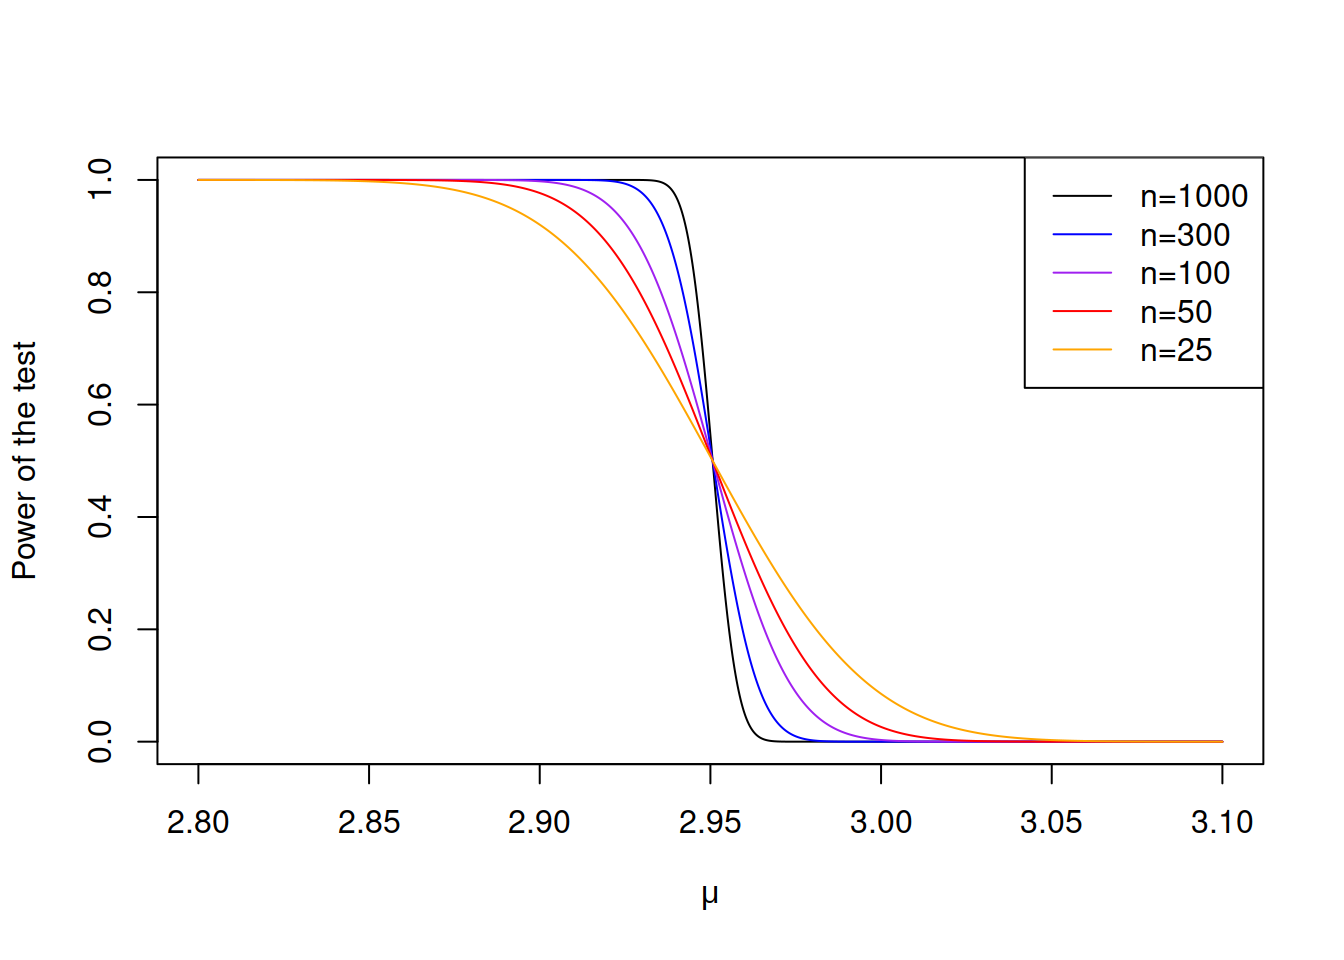 Power curves with different sample sizes.